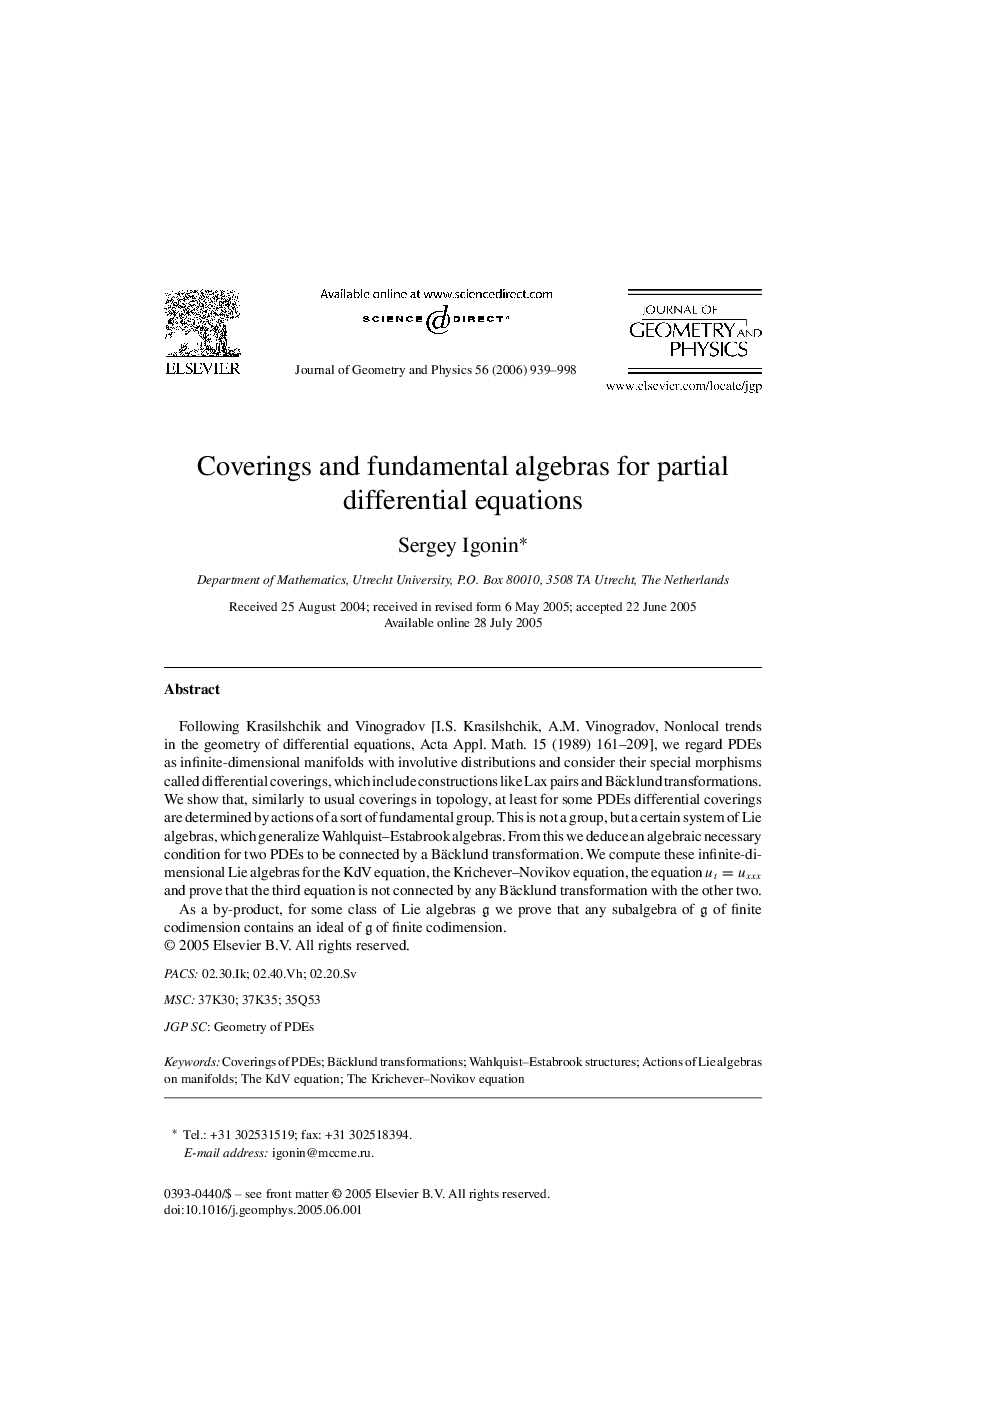 Coverings and fundamental algebras for partial differential equations